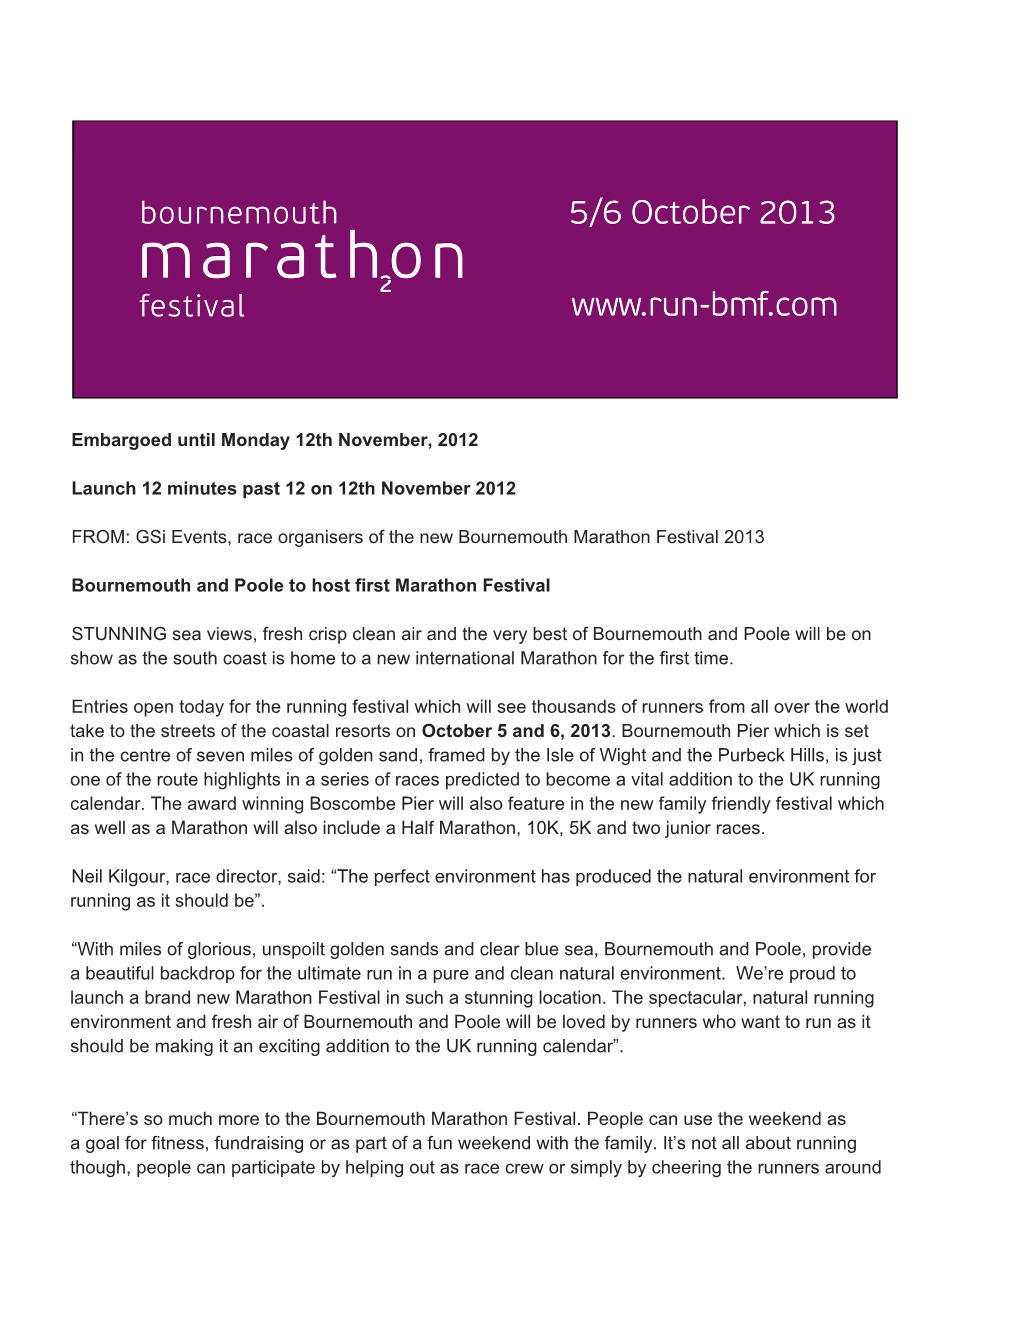 Gsi Events, Race Organisers of the New Bournemouth Marathon Festival 2013